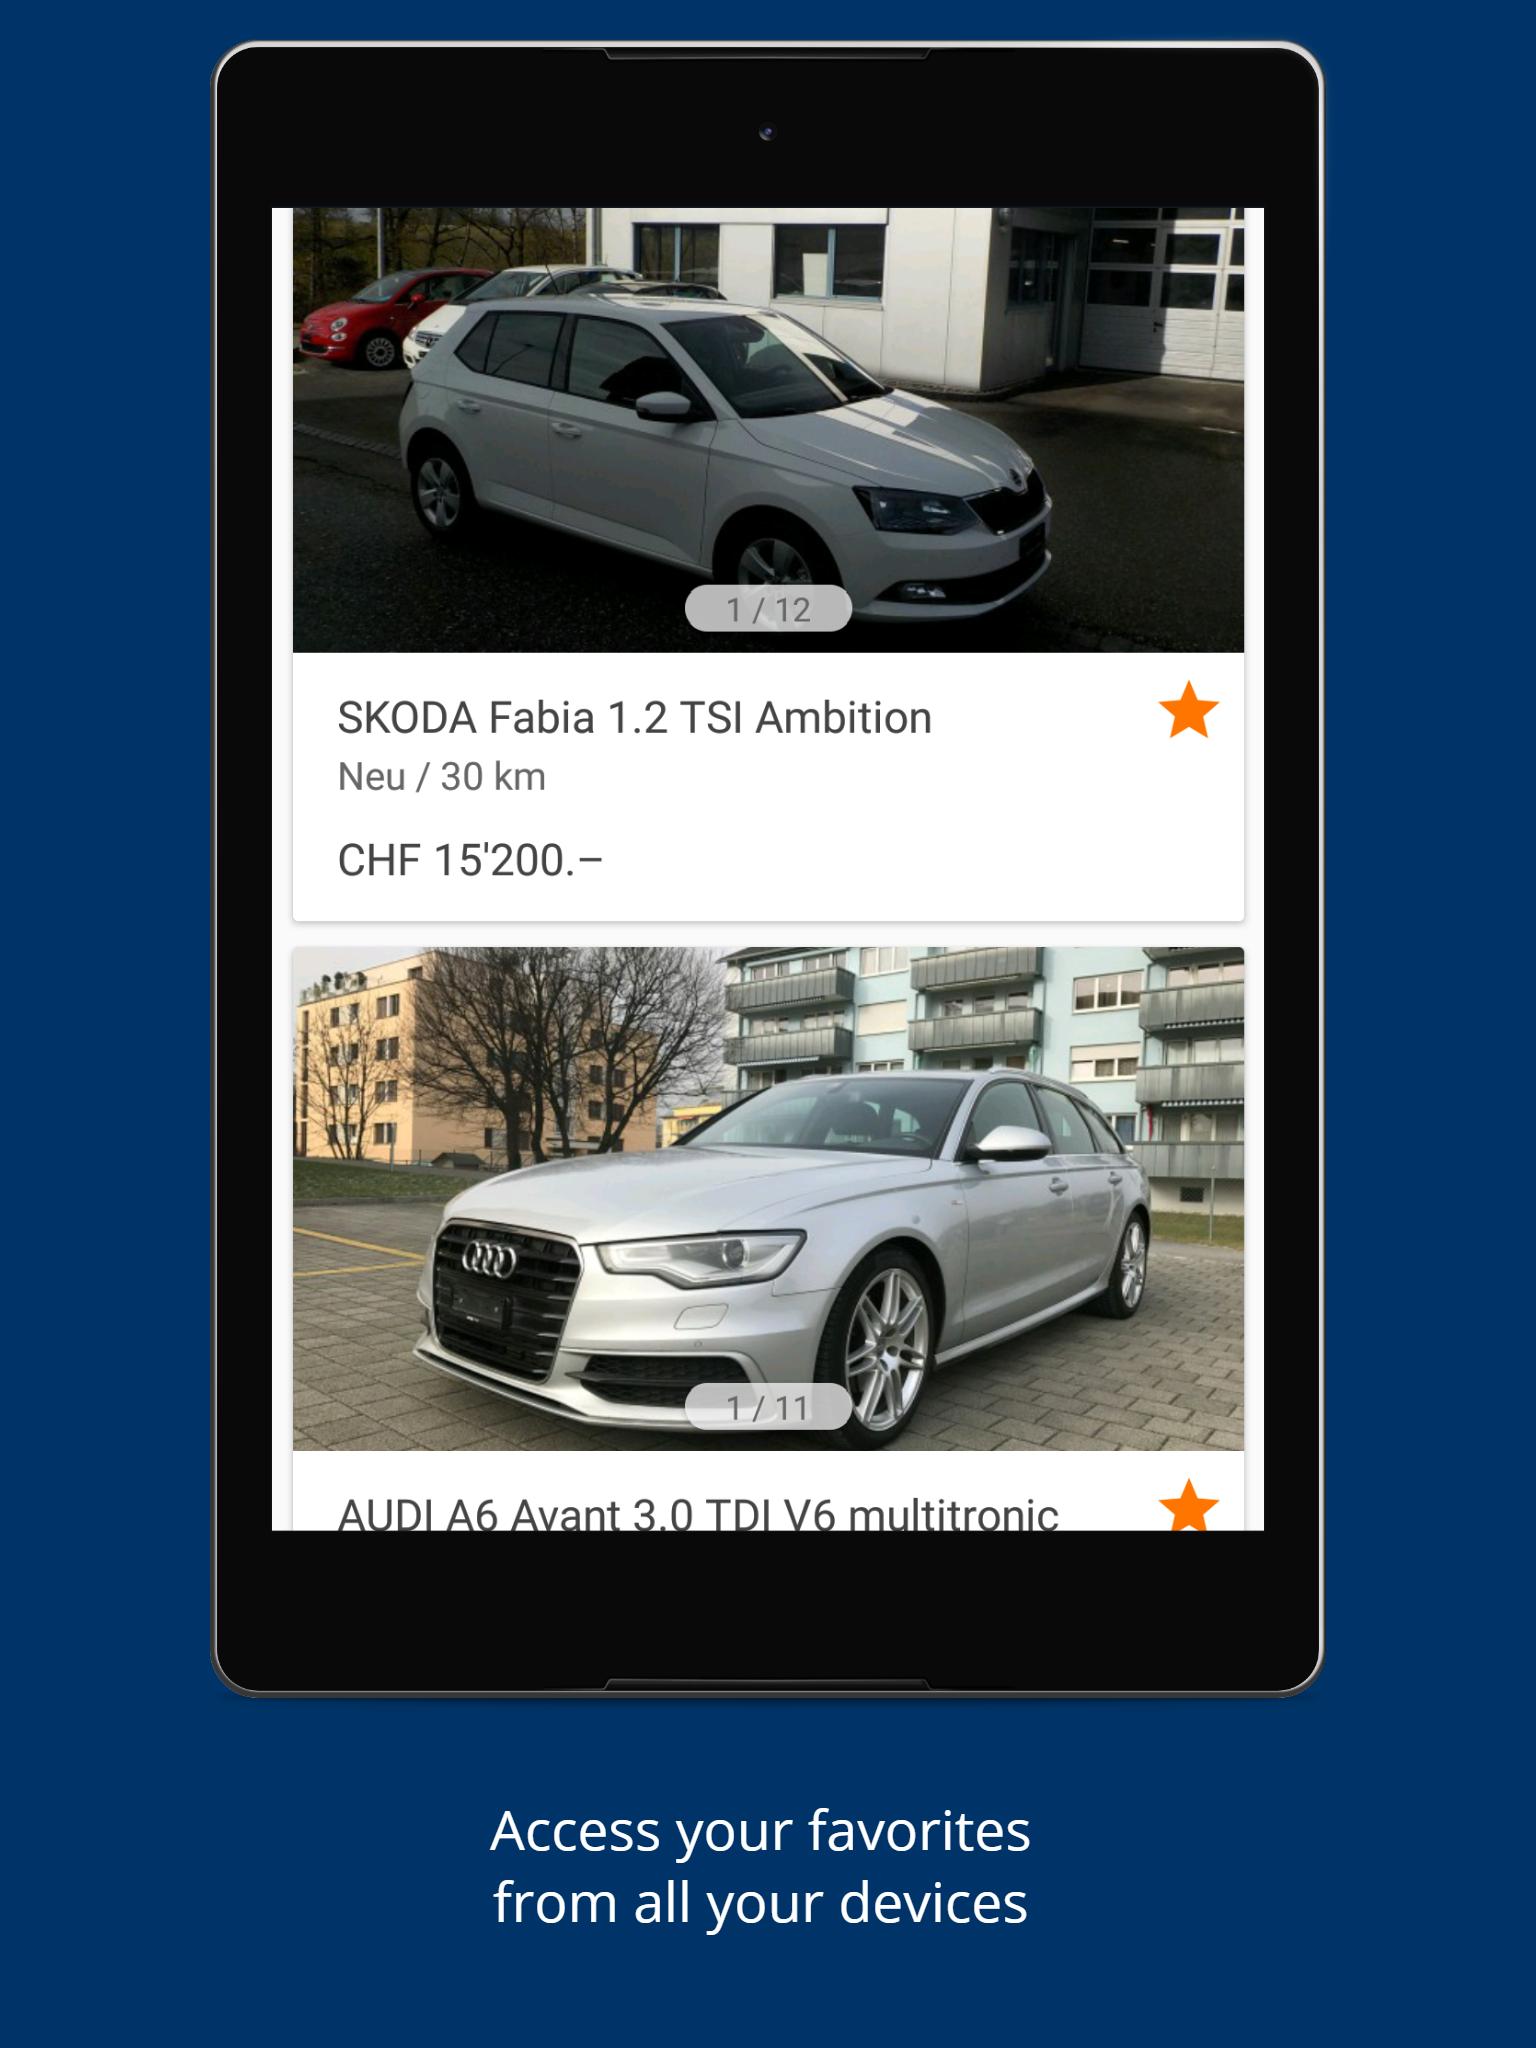 AutoScout24 Switzerland – Find your new car 4.0.0 Screenshot 12